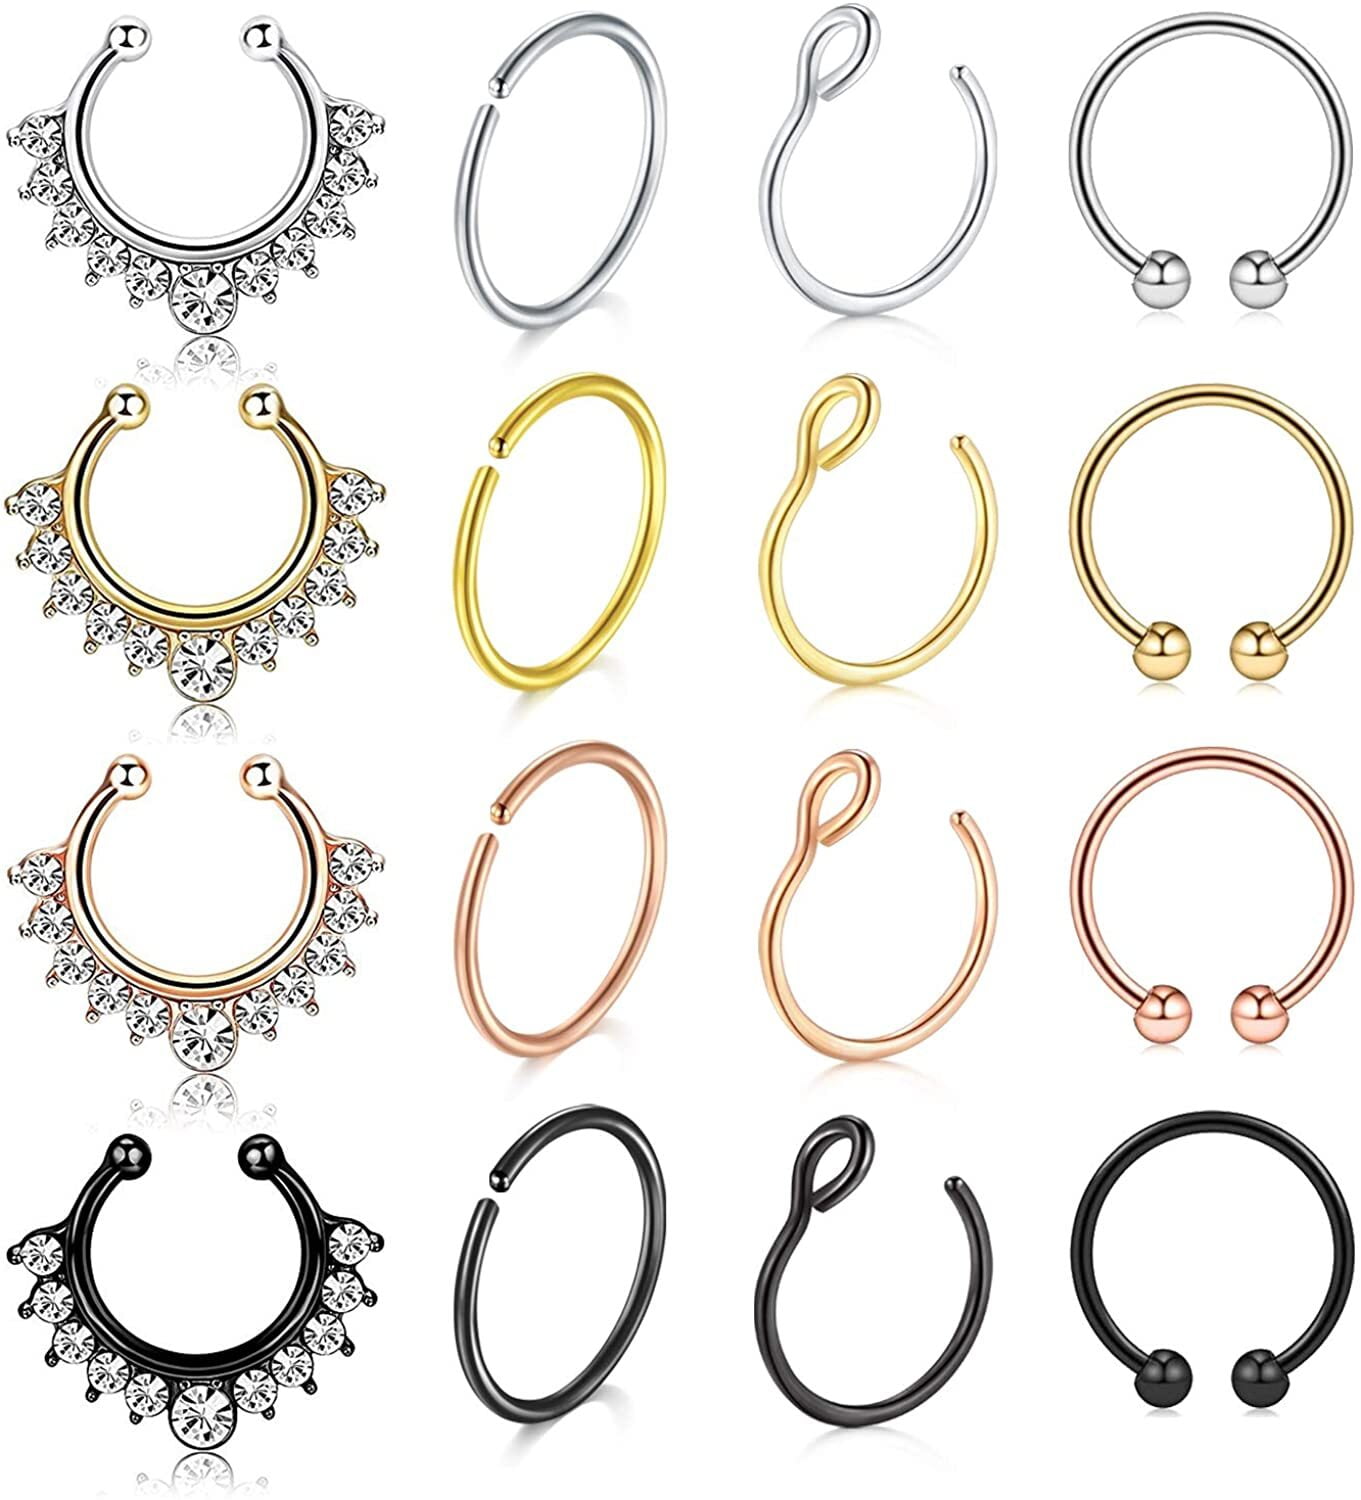 Briana Williams 12PCS Stainless Steel Ear Cuff Ear Clips Non Piercing Cartilage Earrings Fake Nose Lip Suptum Ring Set for Men Women 8 Various Styles Faux Body Piercing Jewelry 